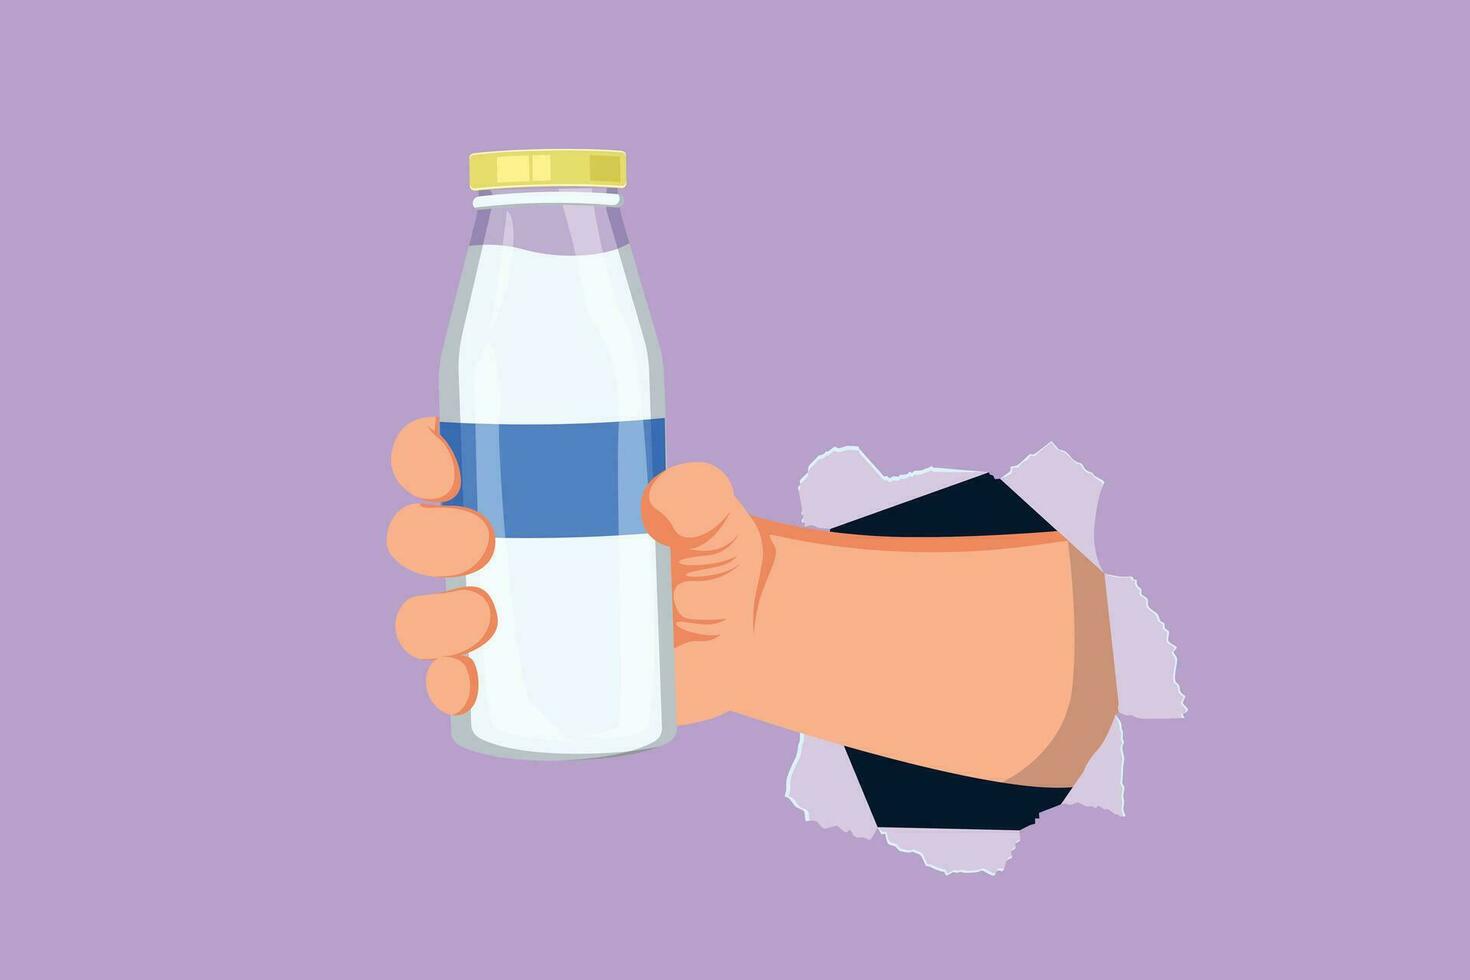 Graphic flat design drawing hand holding fresh milk on bottle glass packaging healthy drink product through torn blue paper or hole. Fresh milk for health food logo. Cartoon style vector illustration